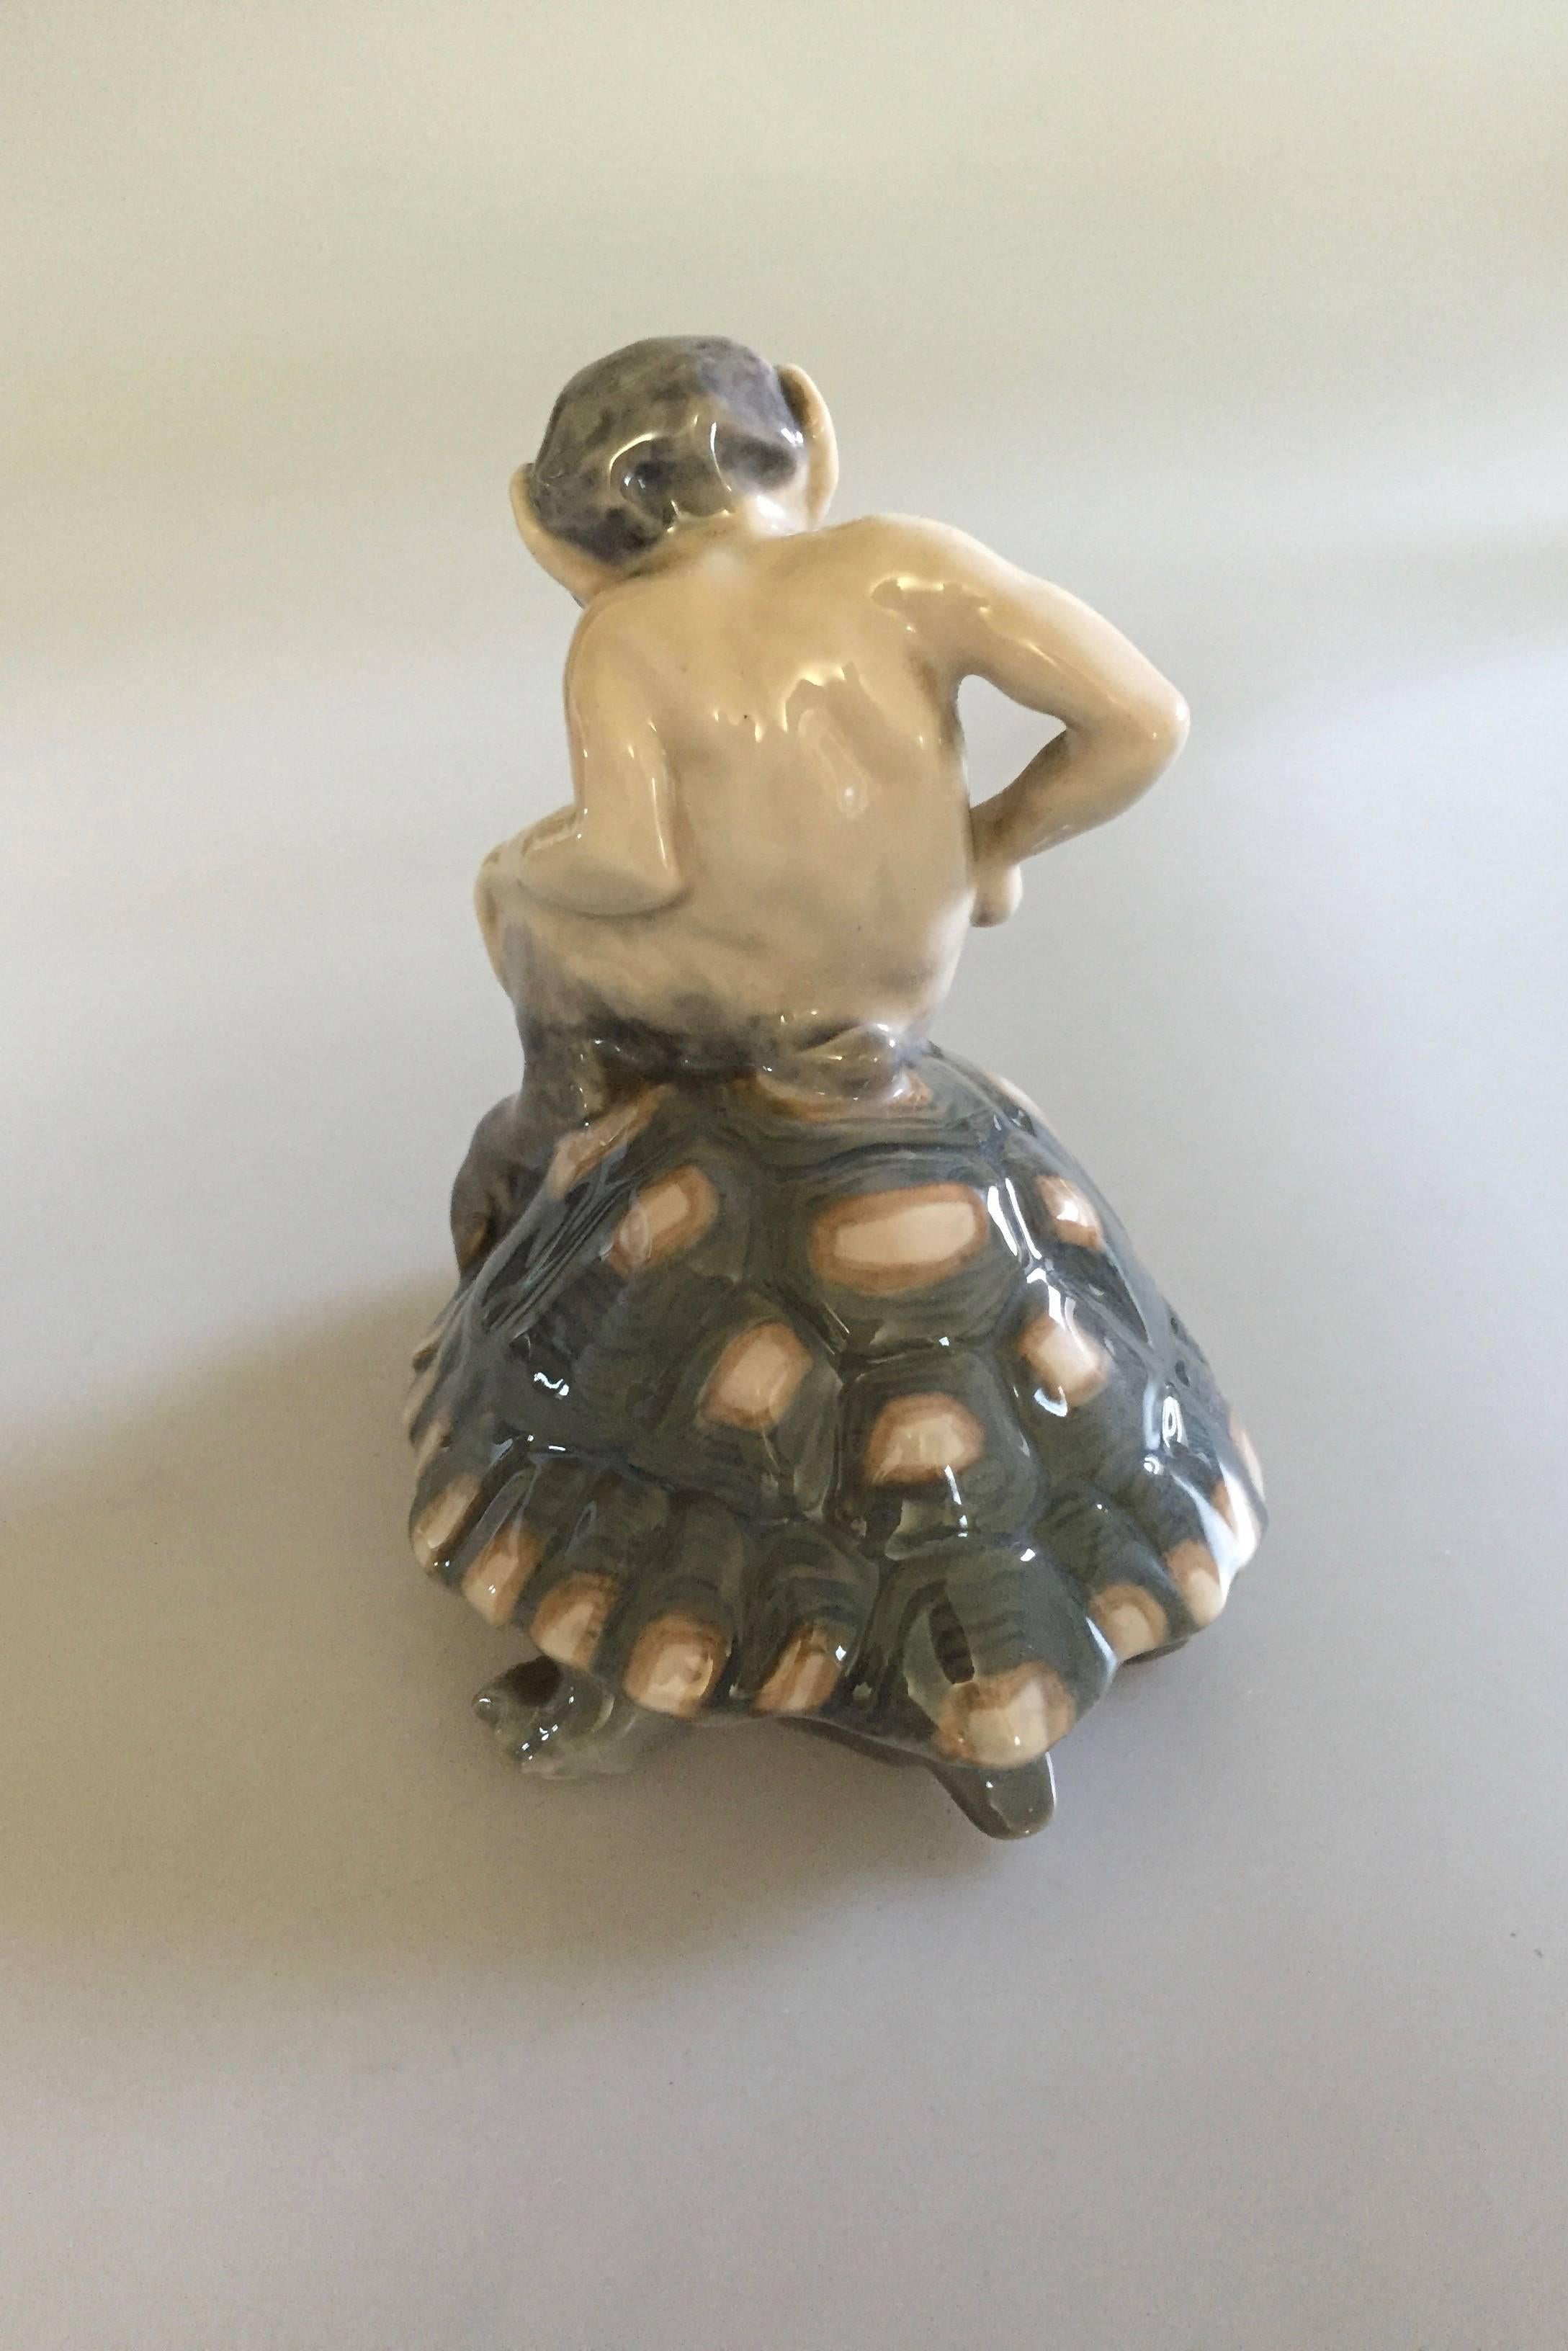 Royal Copenhagen Knud Kyhn Faun/Pan on a Turtle #1880

In perfect condition. Measures 13 x 13 cm (5 1/8